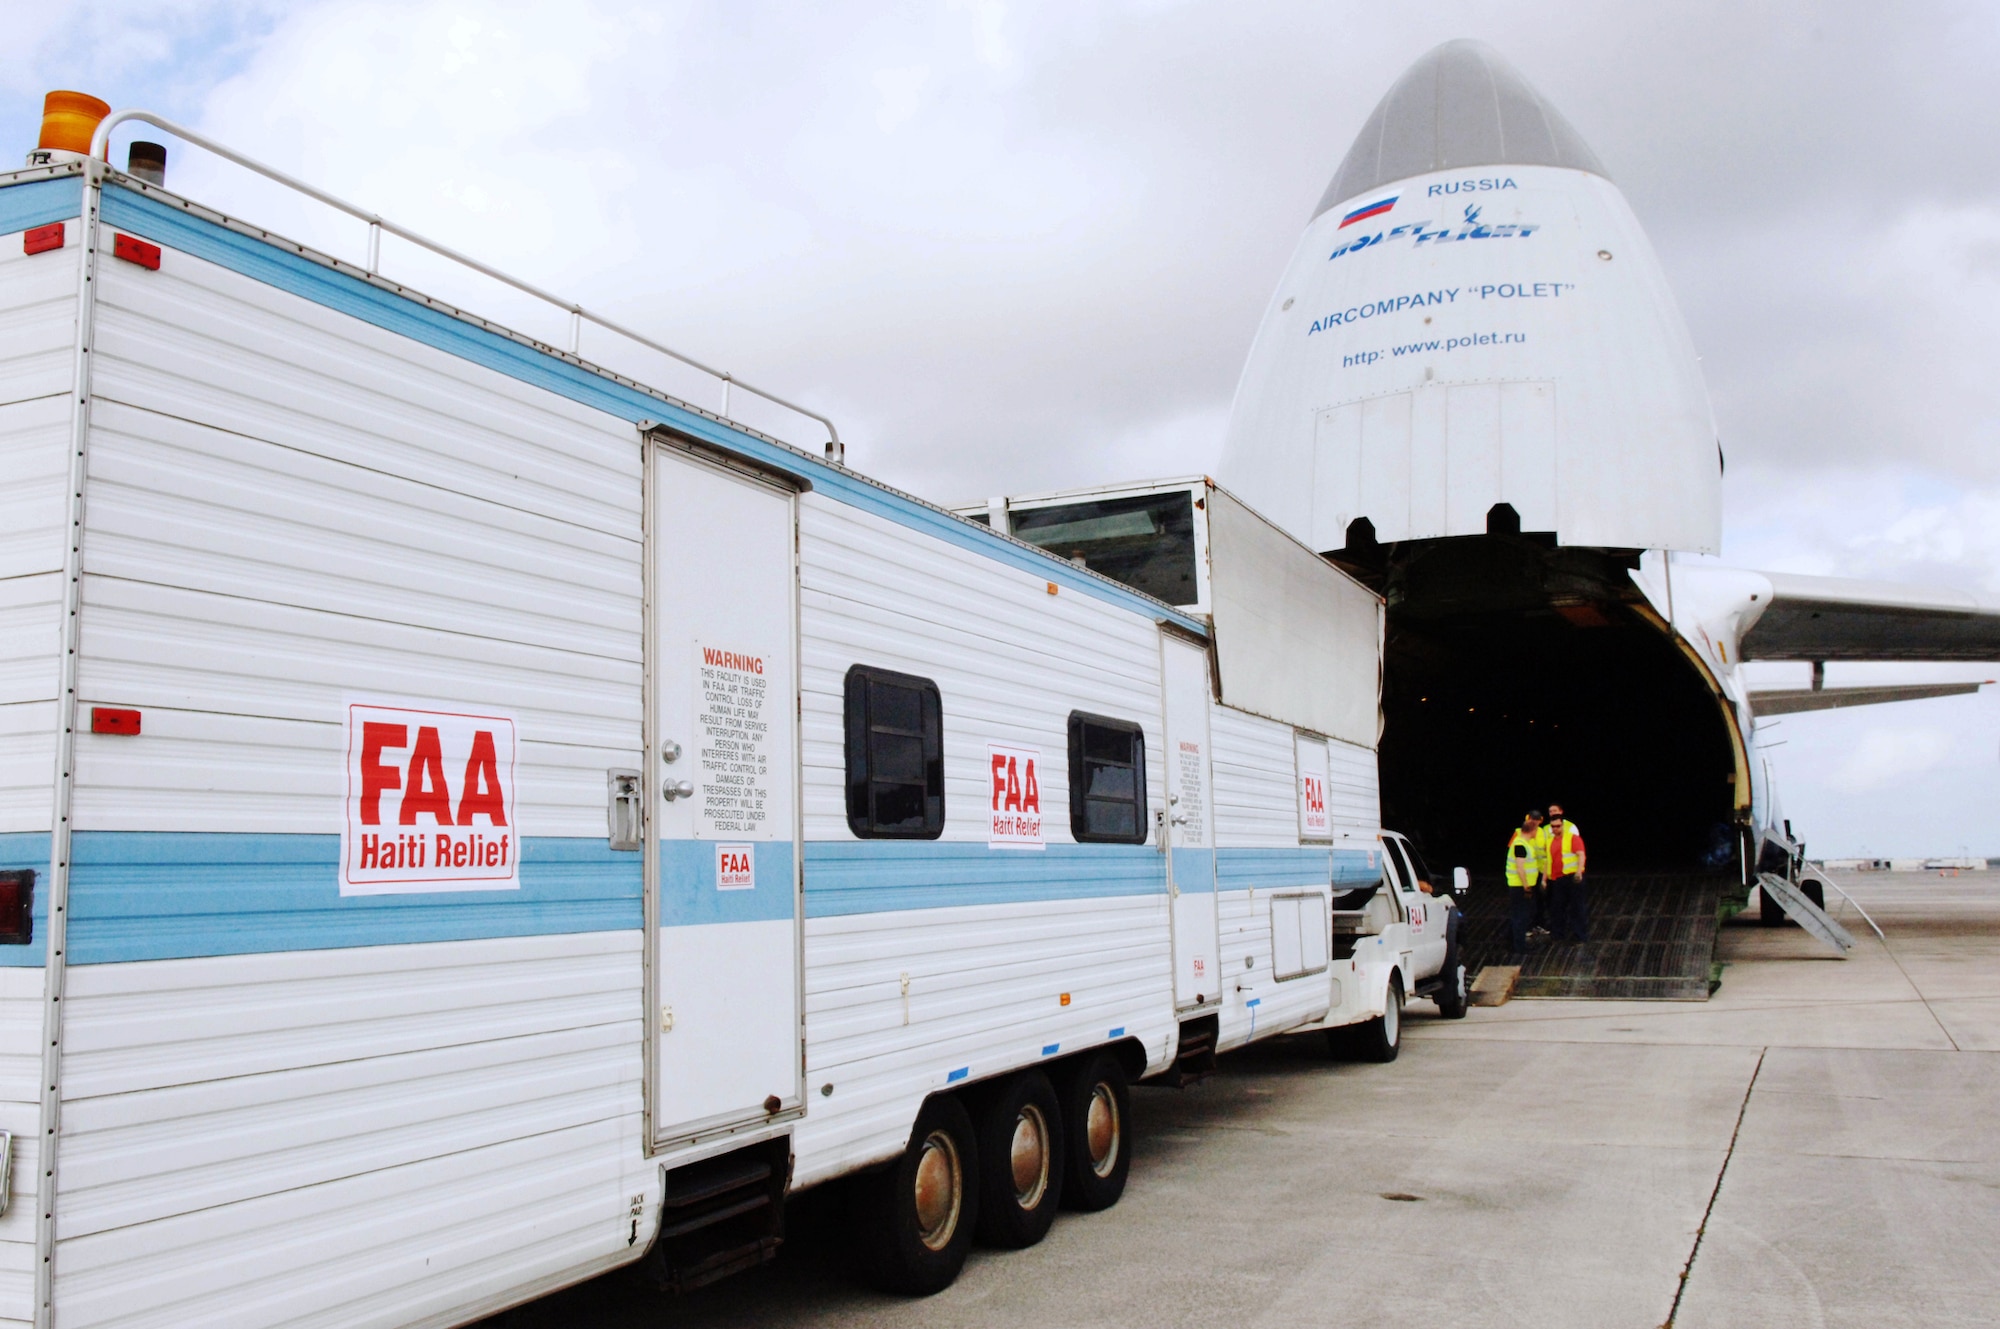 A mobile air traffic control tower is loaded onto a Russian Antonov An-124 cargo plane at Homestead Air Reserve Base, Fla., Jan. 21, 2010.  The mobile air traffic control tower will increase the efficiency of aid being delivered to earthquake victims in Haiti. (U.S. Air Force photo/Tech Sgt Andy Bellamy)